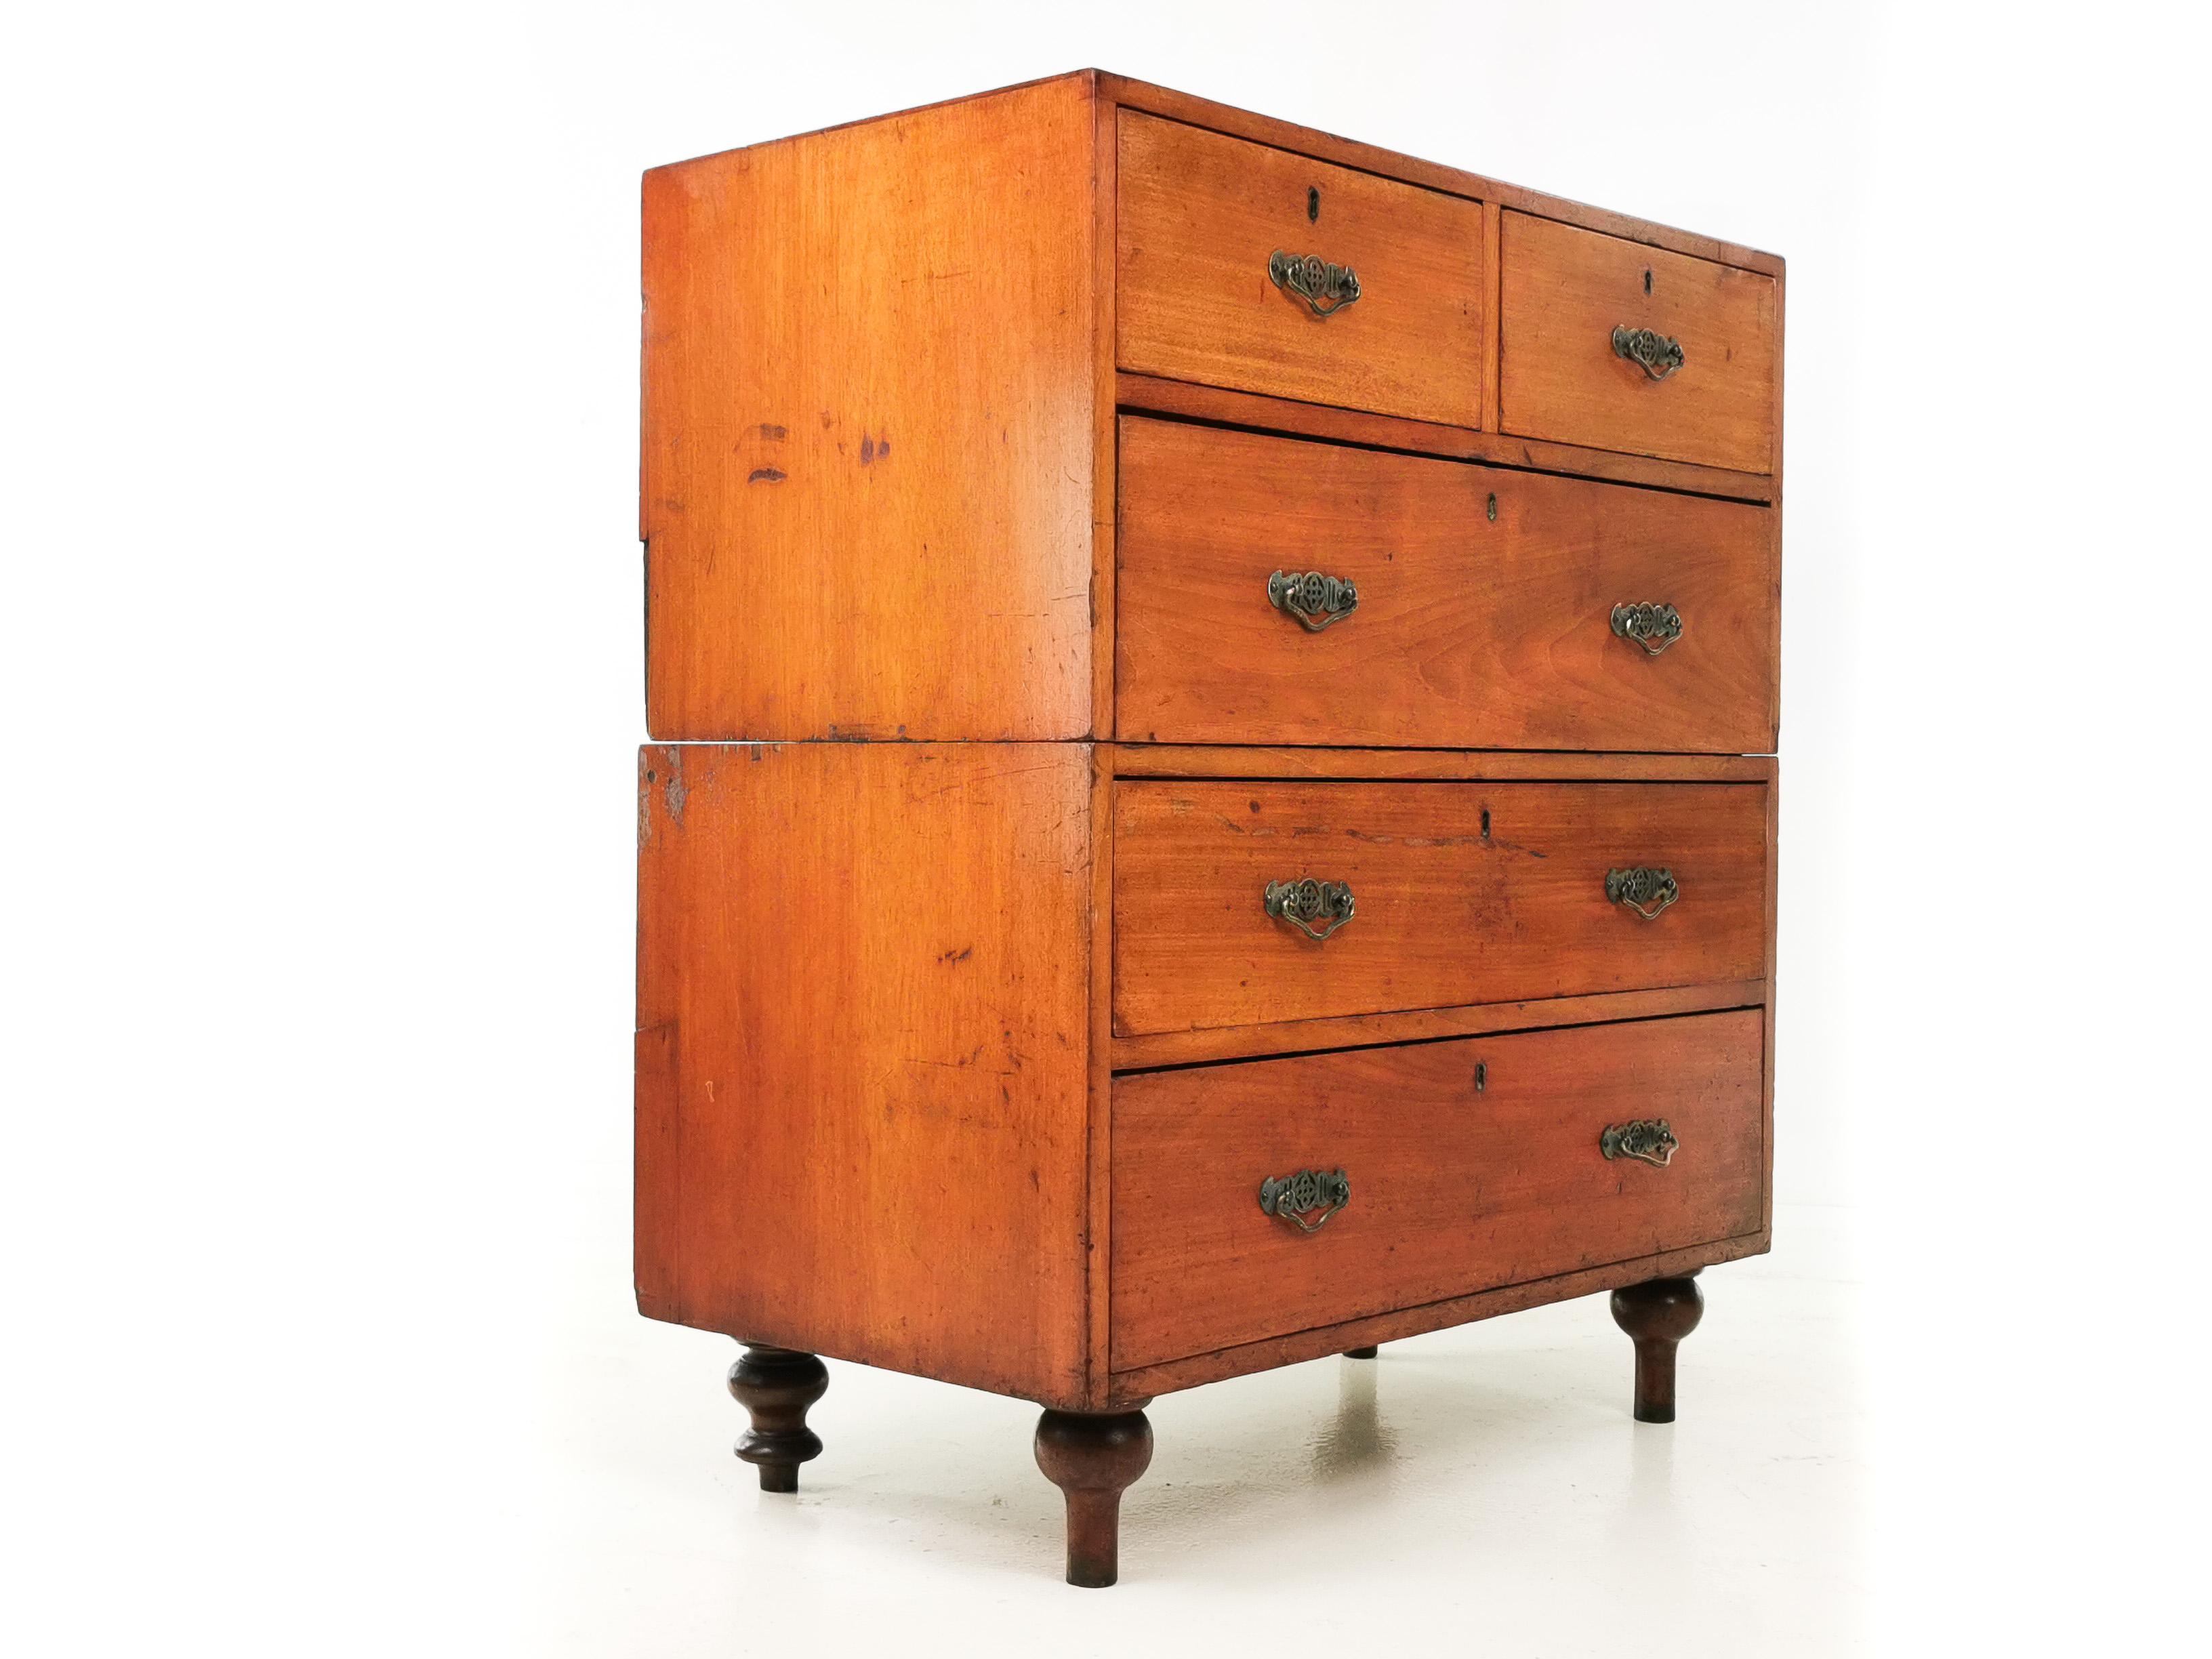 19th Century Antique British Military Campaign Chest of Drawers